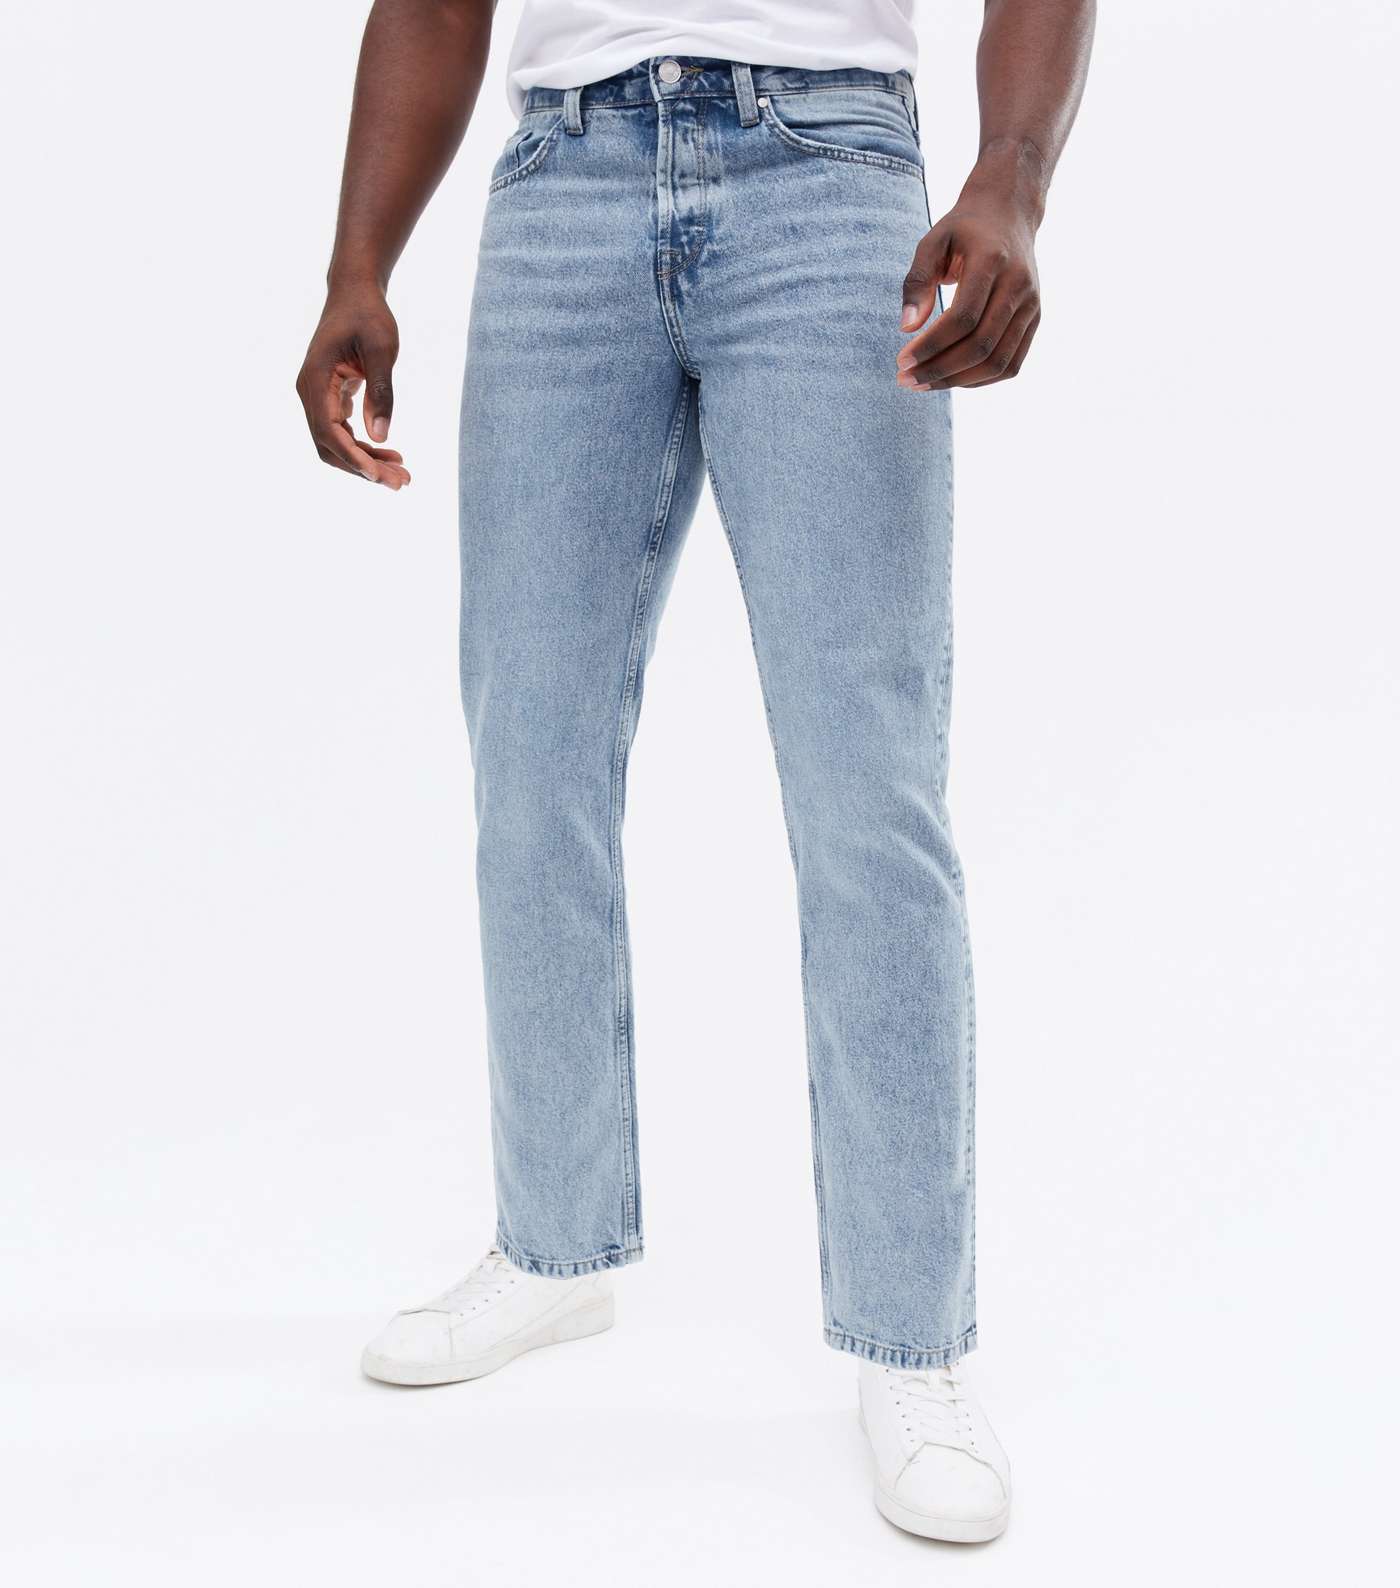 Only & Sons Blue Light Wash Straight Fit Jeans Image 2